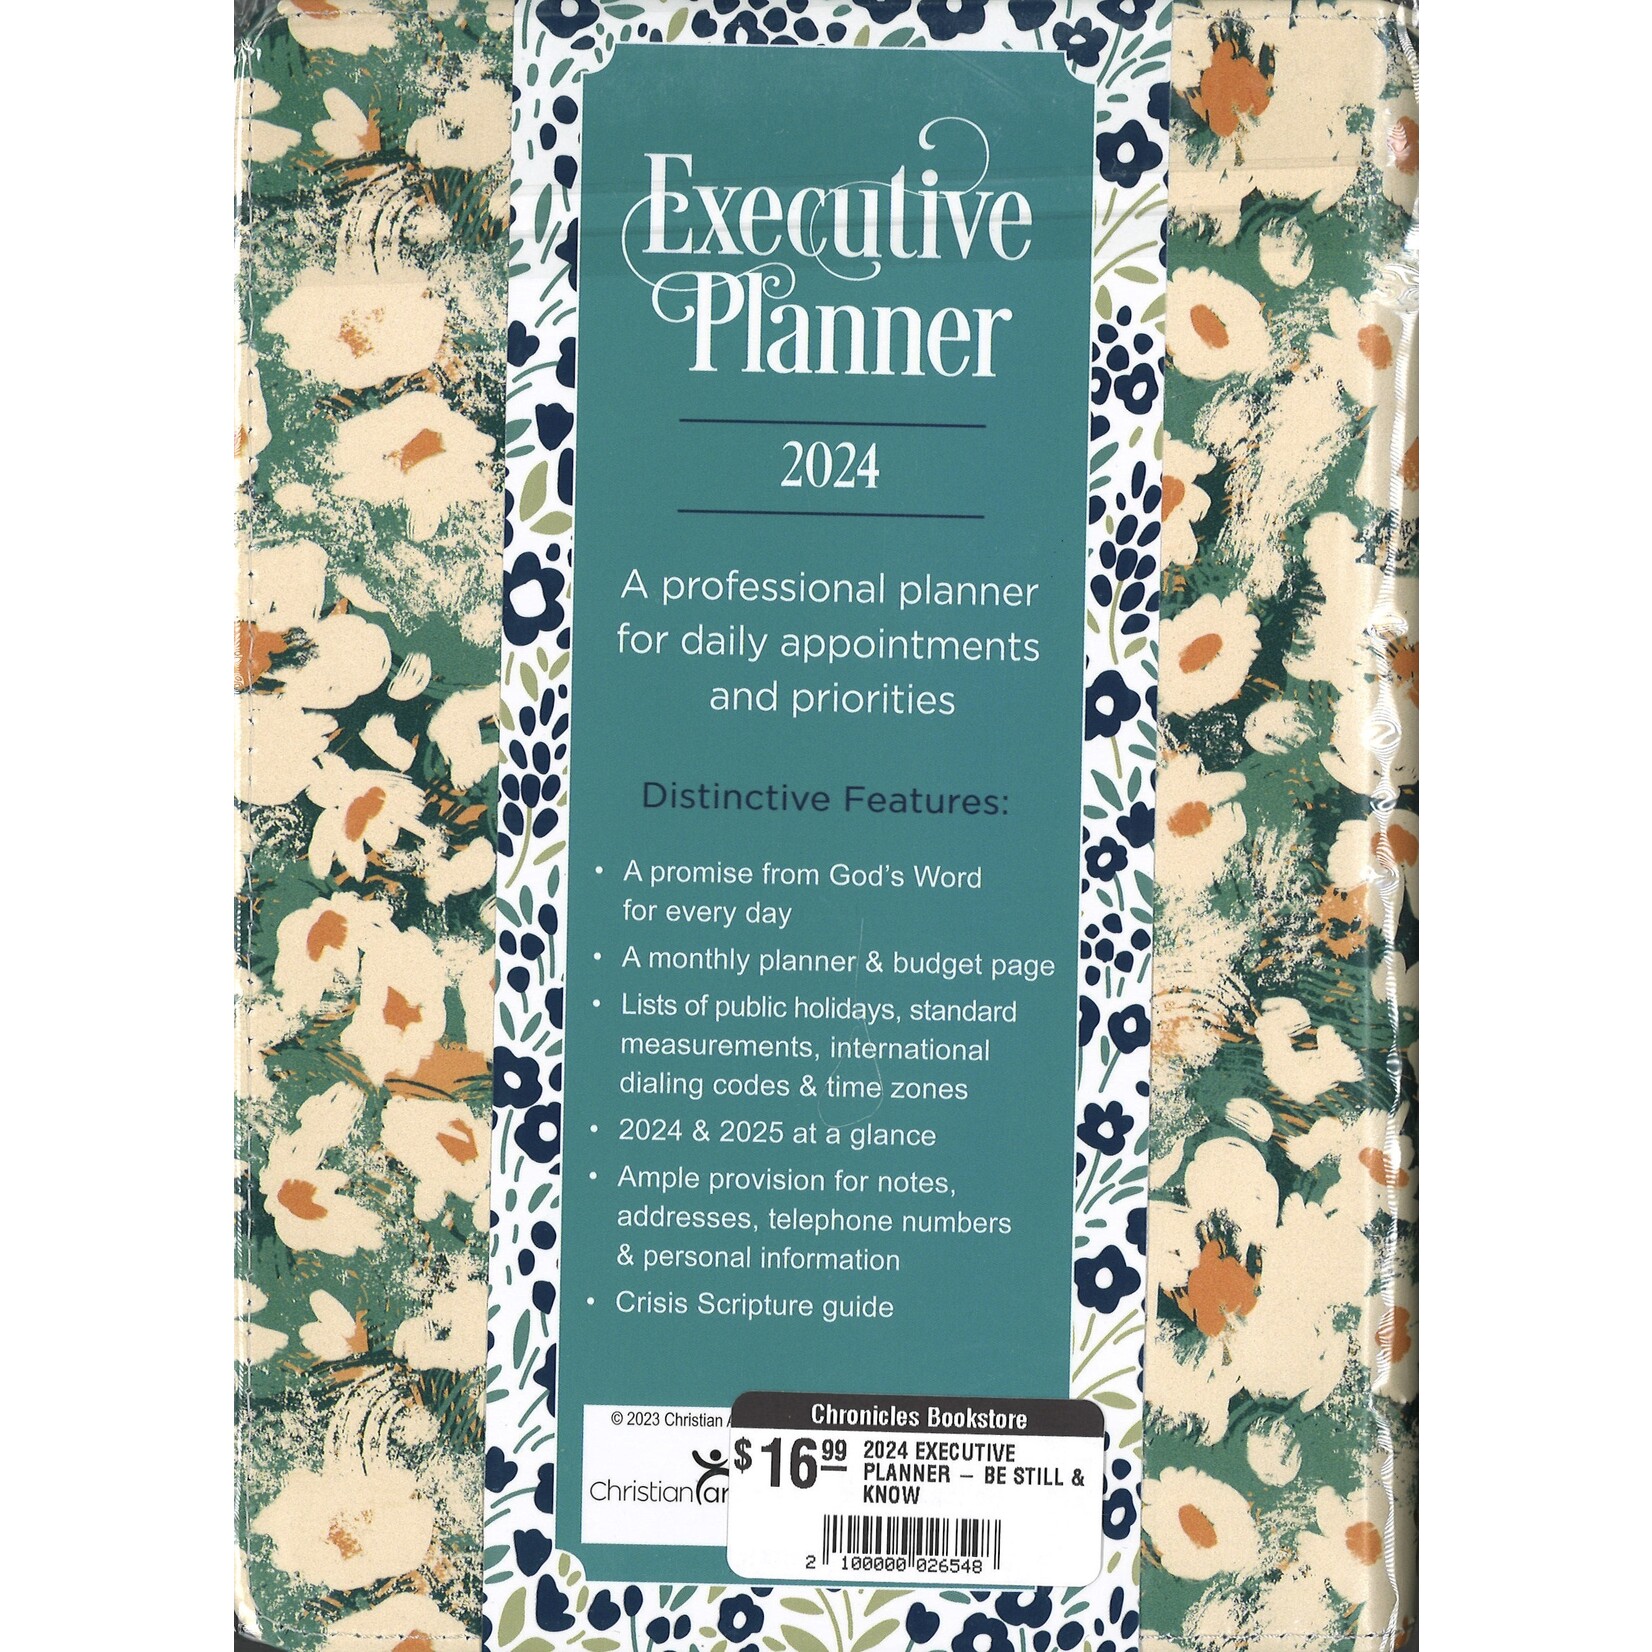 2024 EXECUTIVE PLANNER - BE STILL & KNOW